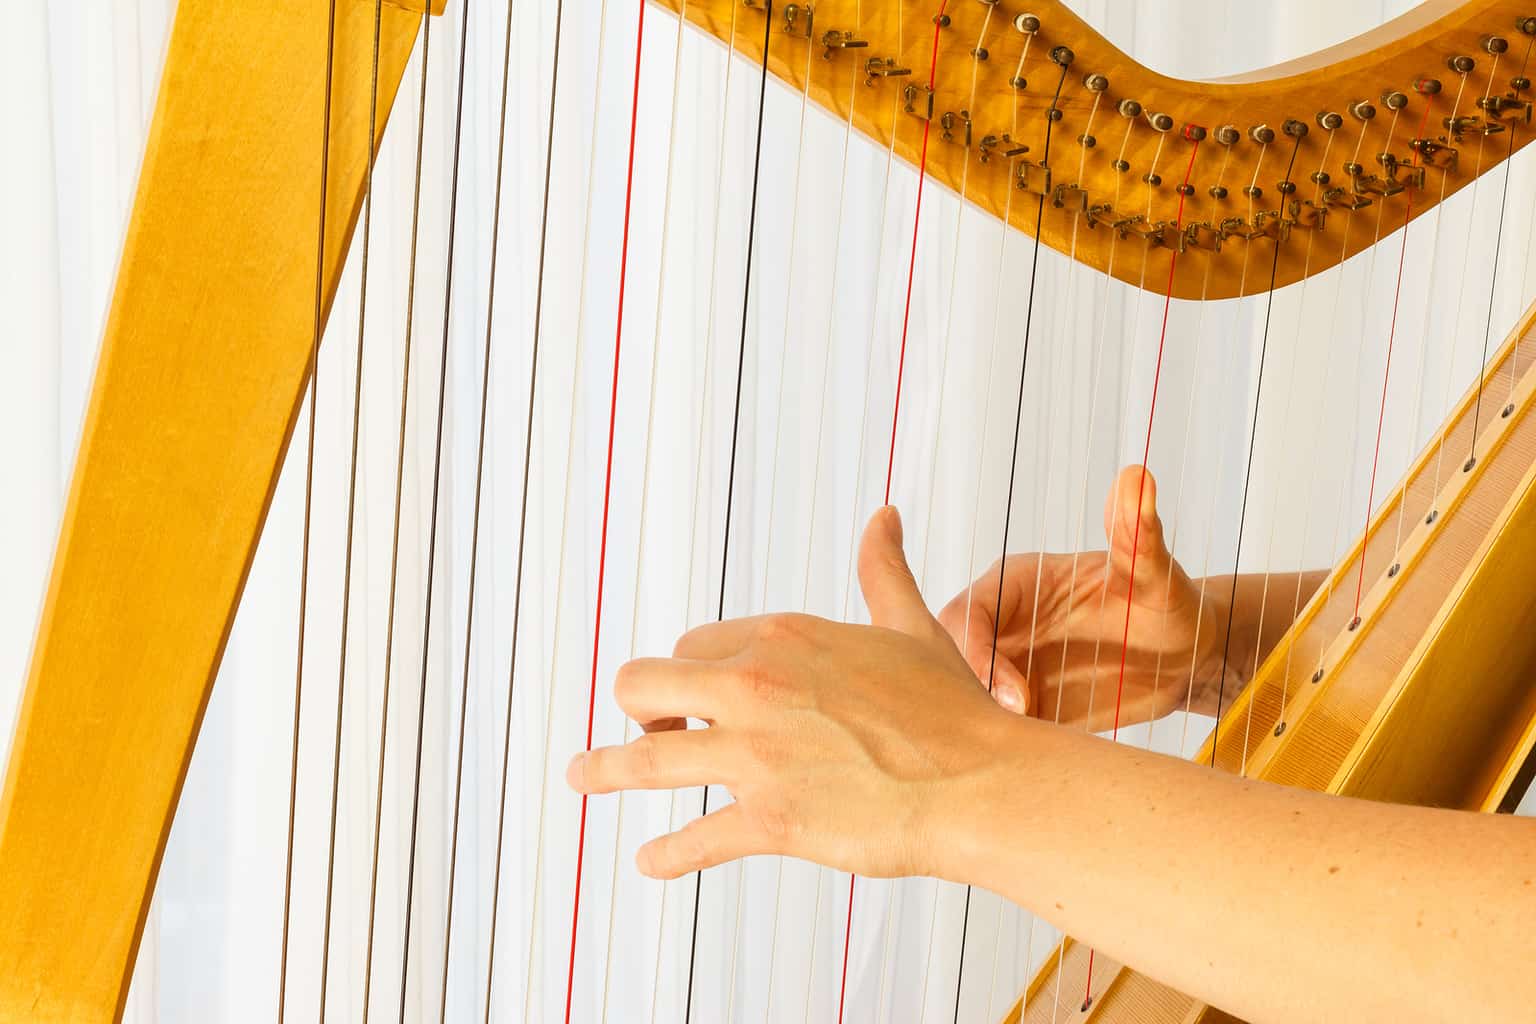 Playing the Celtic Harp